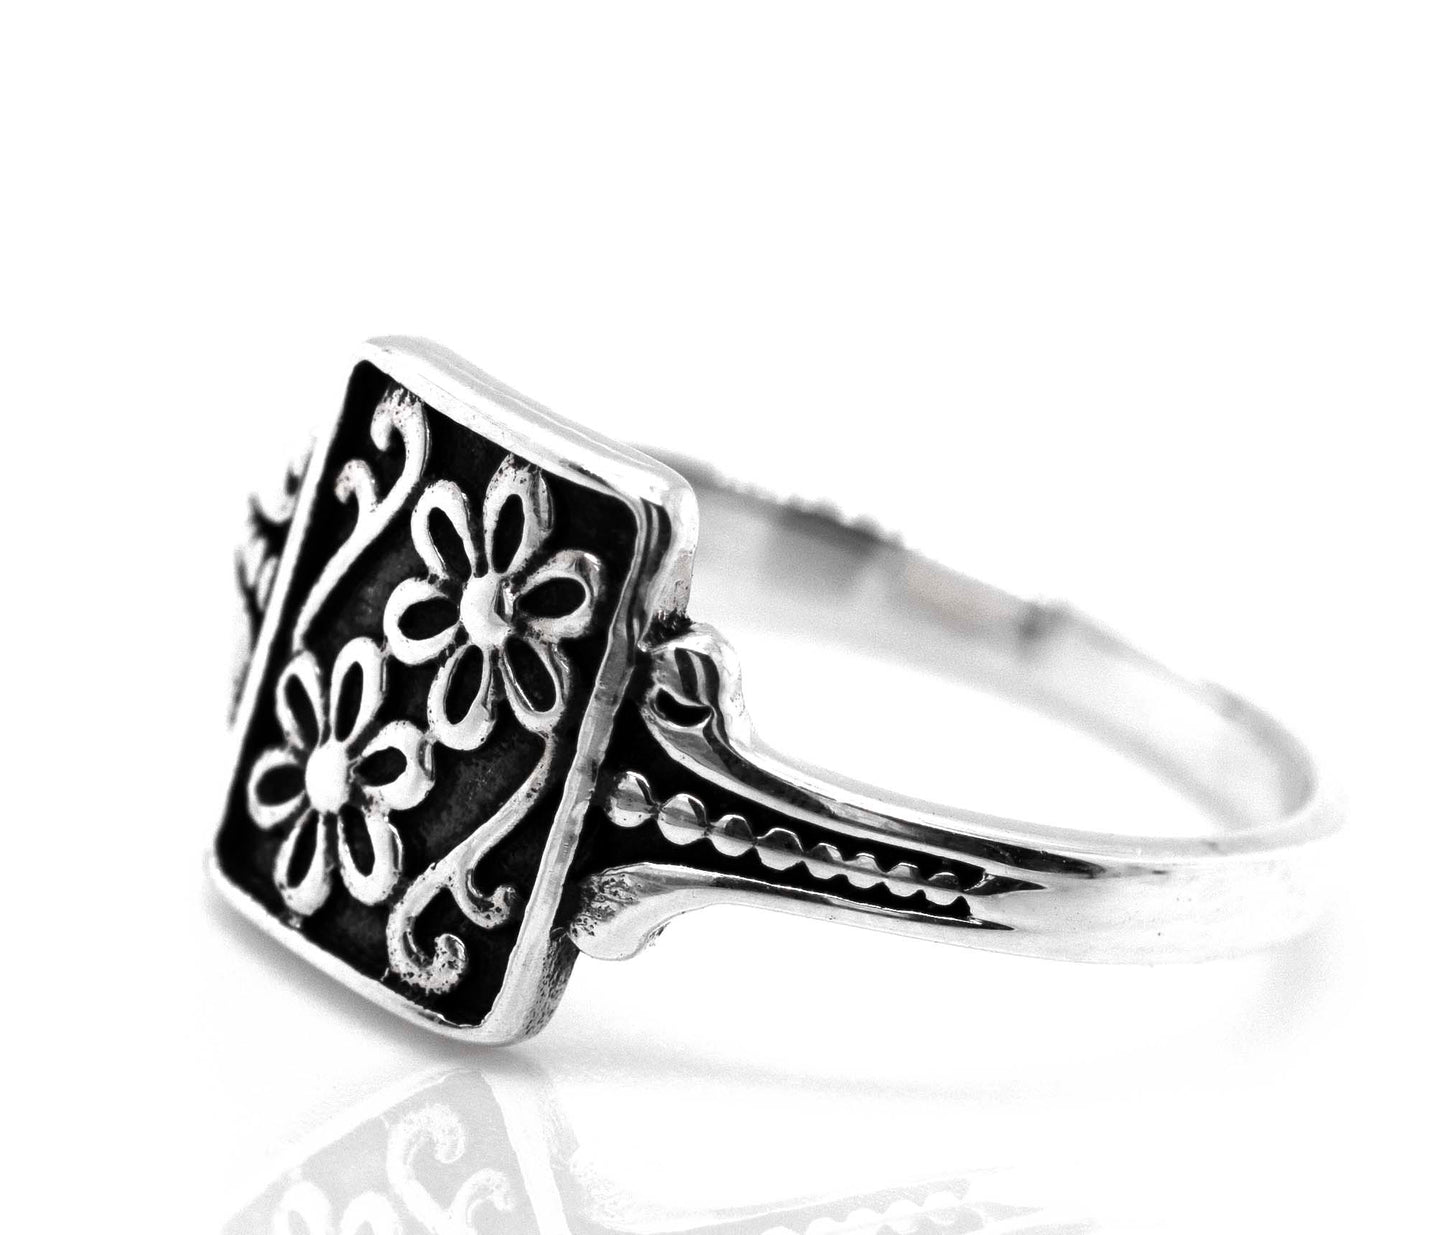 A Shield With Flower Pattern Ring.